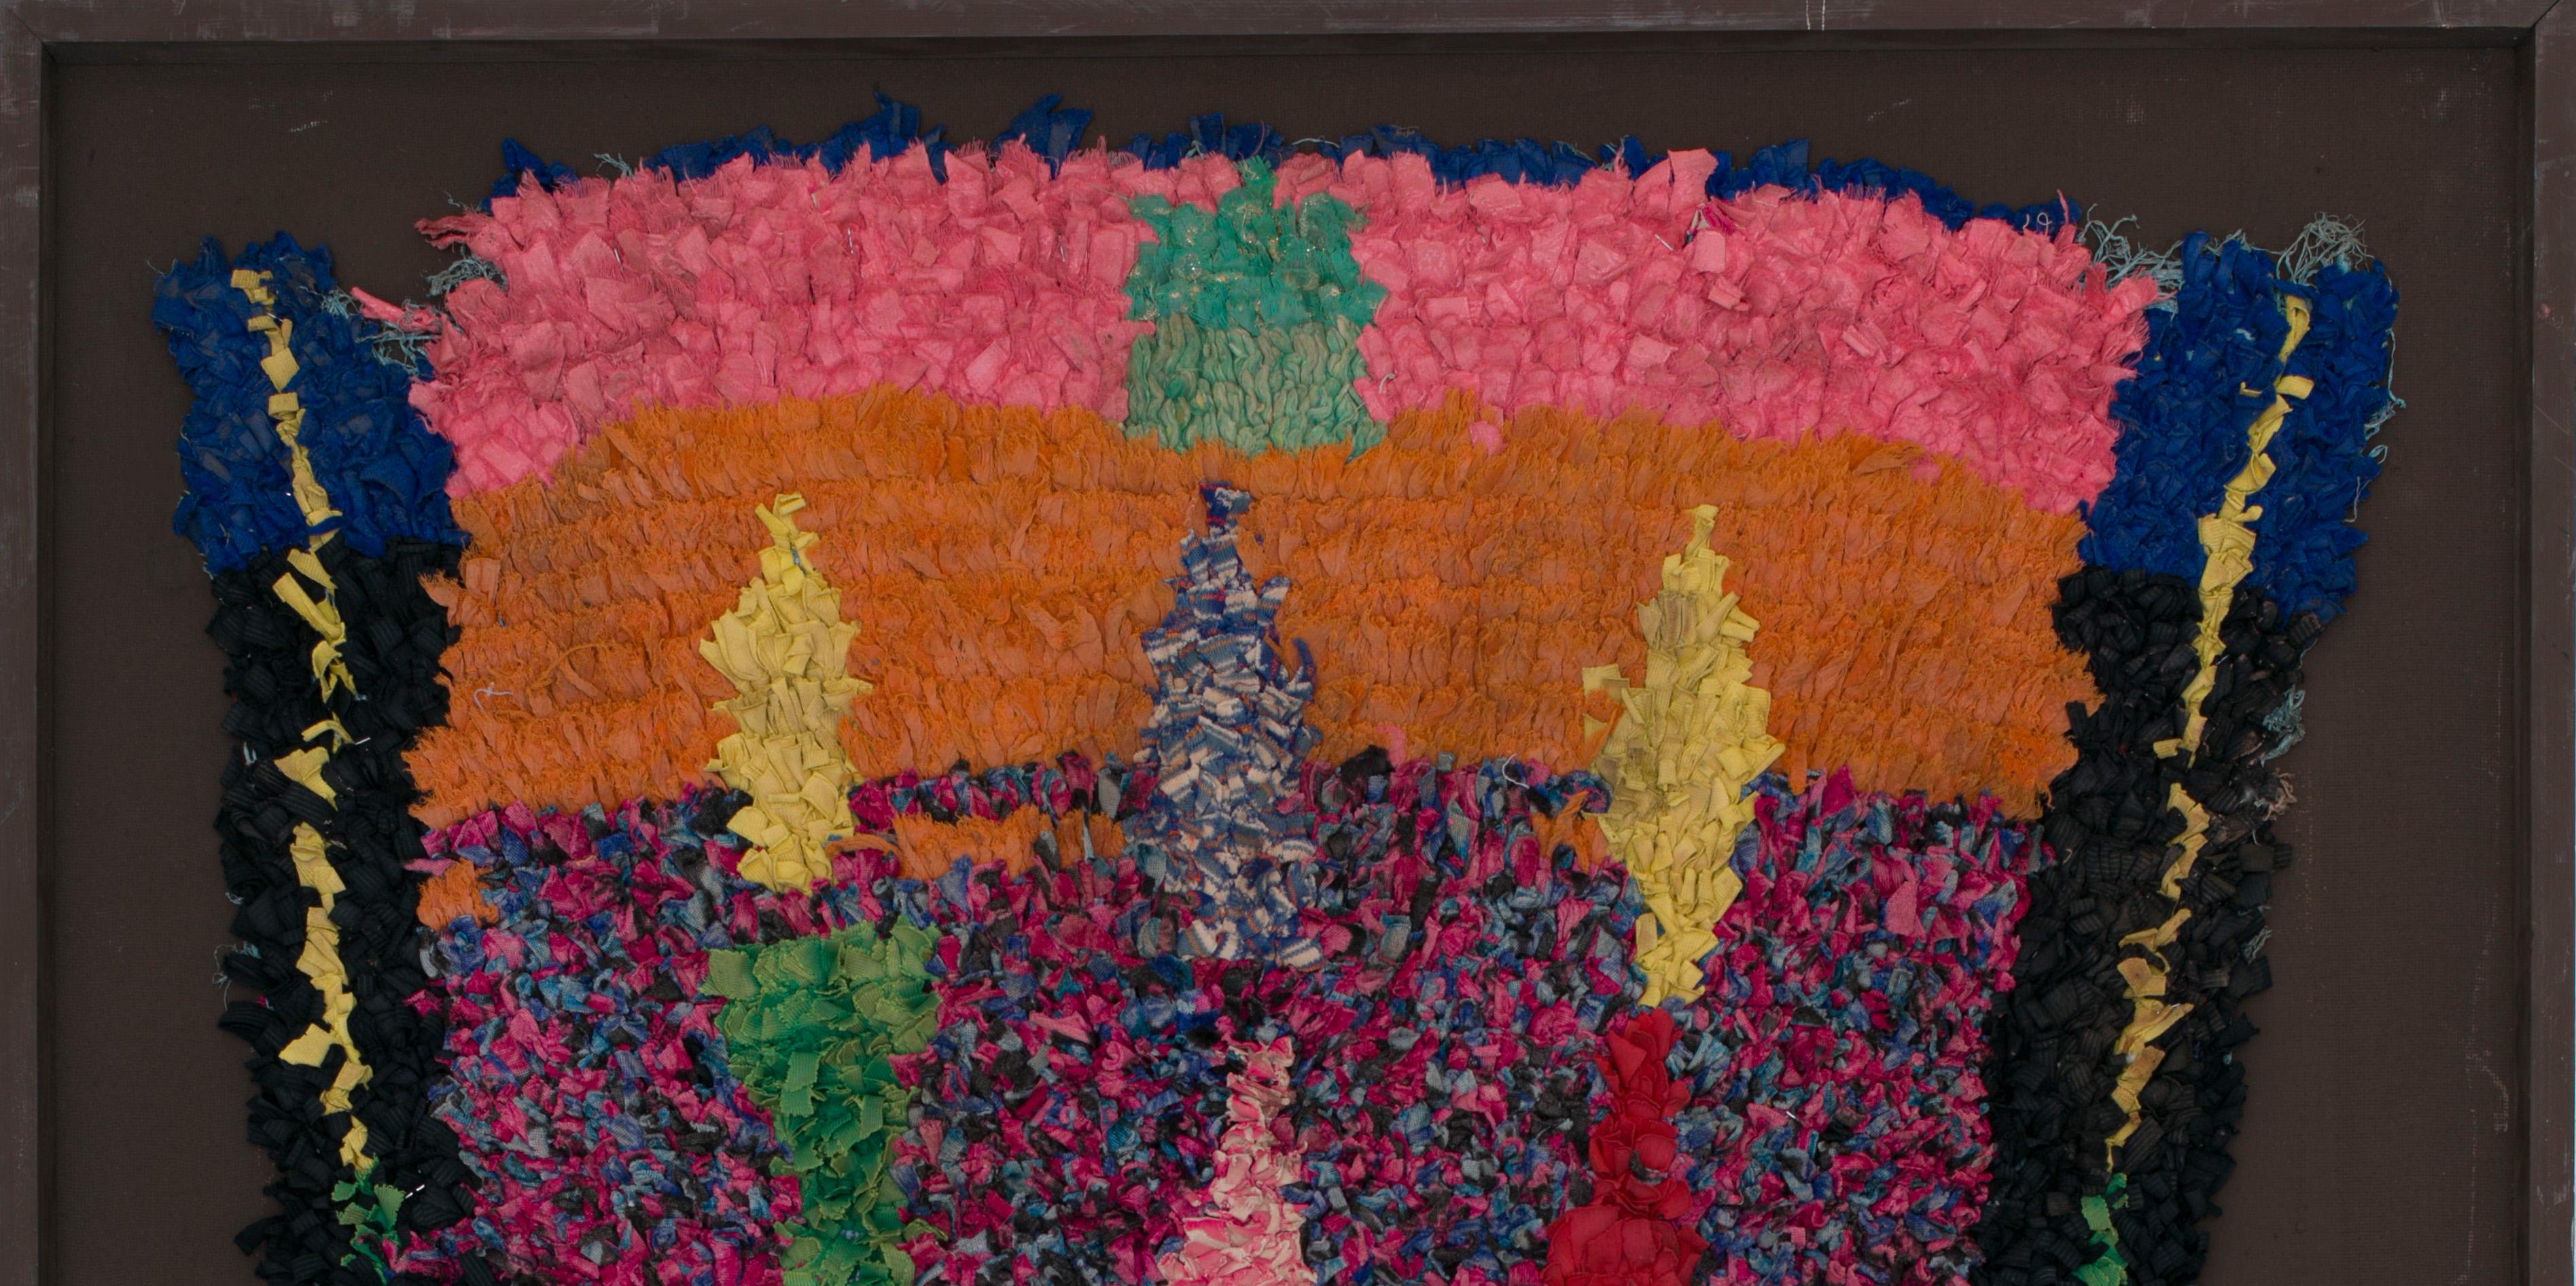 This tapestry was made by Berber women from the Atlas Mountains.
Made from woollen ends and other threads, embroidered on wasted plastic bags of cereals, this unique and vintage work is the demonstration of the secret transmitted from mother to